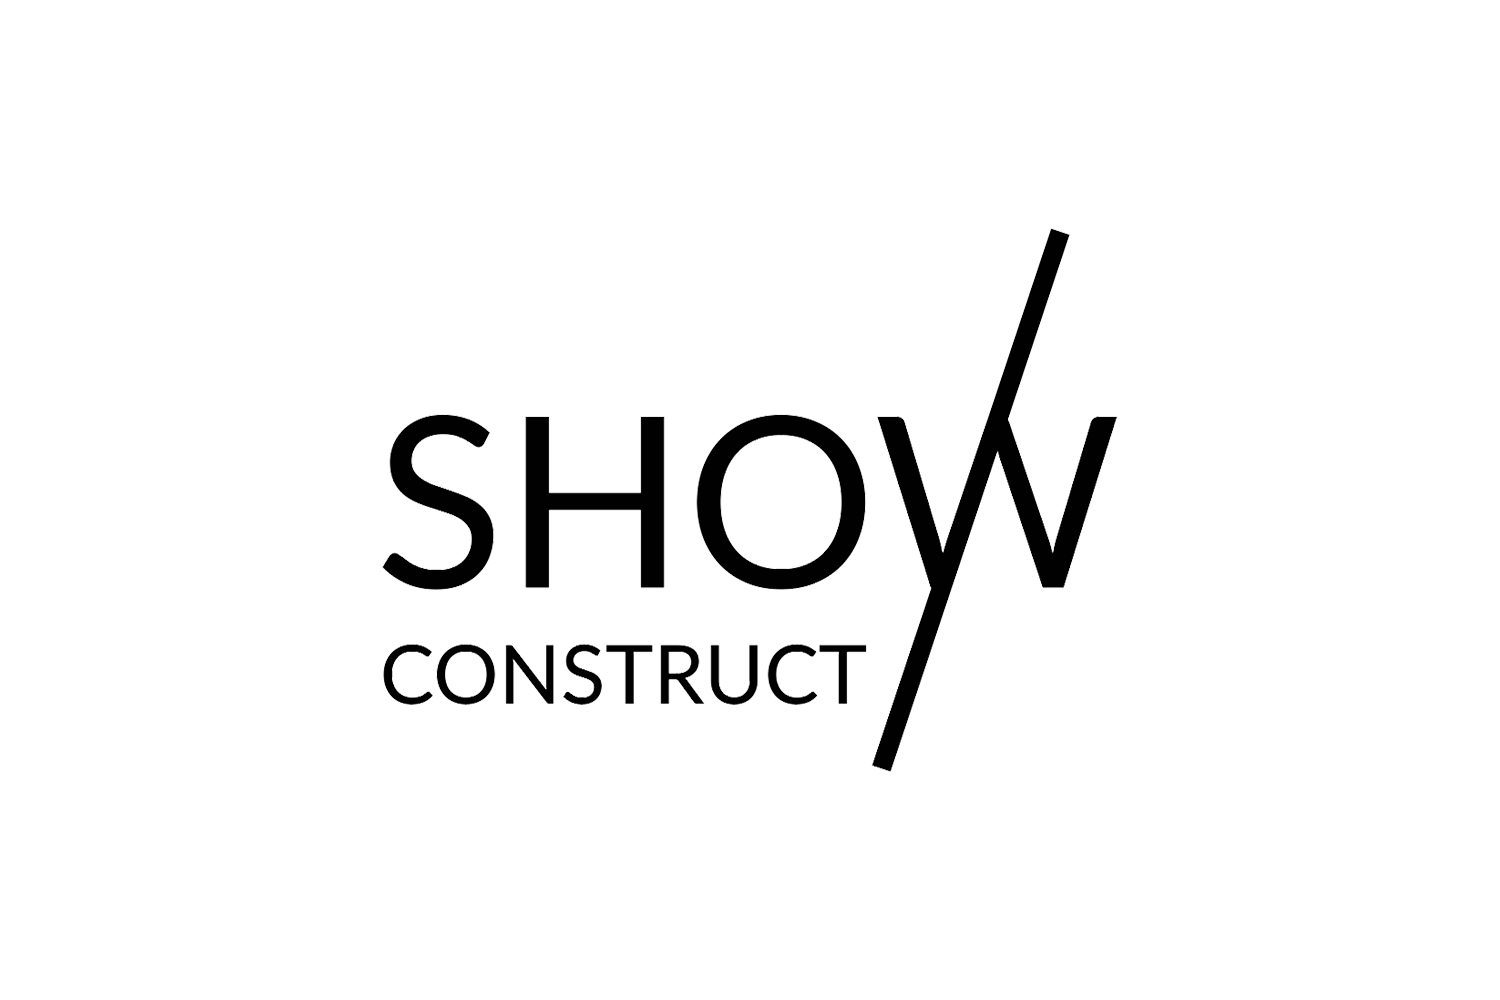 SHOW CONSTRUCT